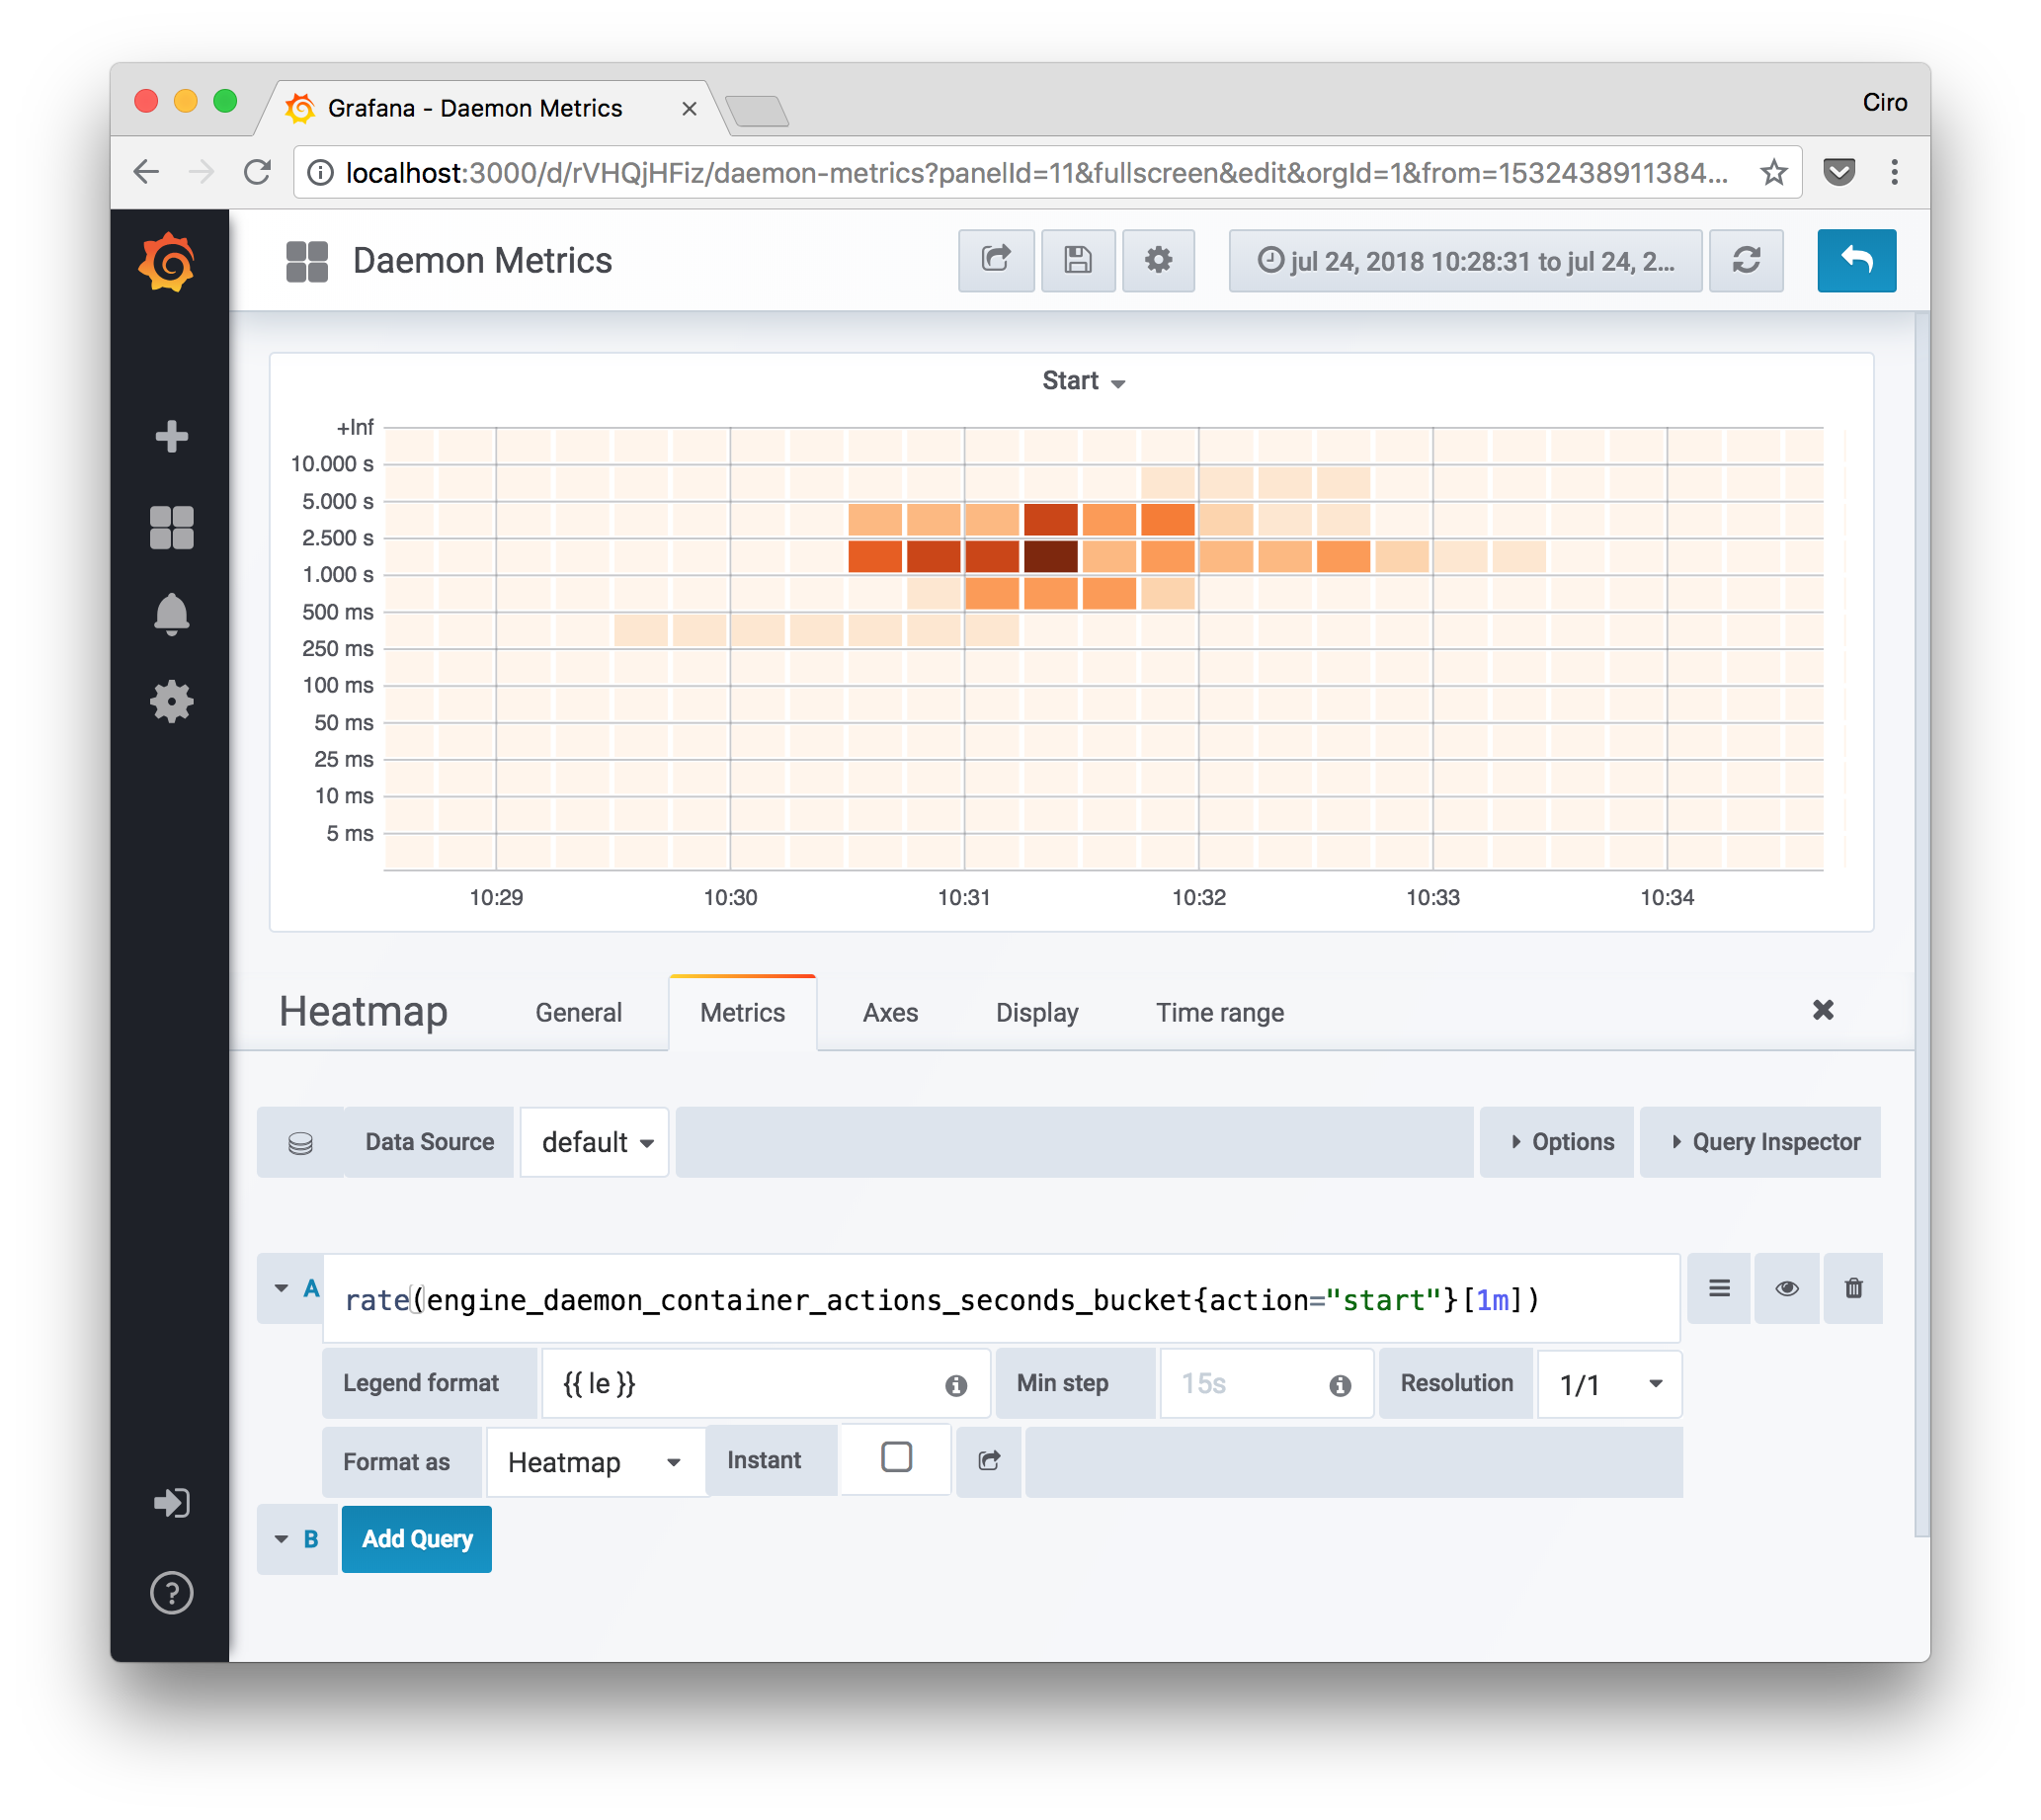 Grafana Dashboard displaying container startup times in a Heatmap 